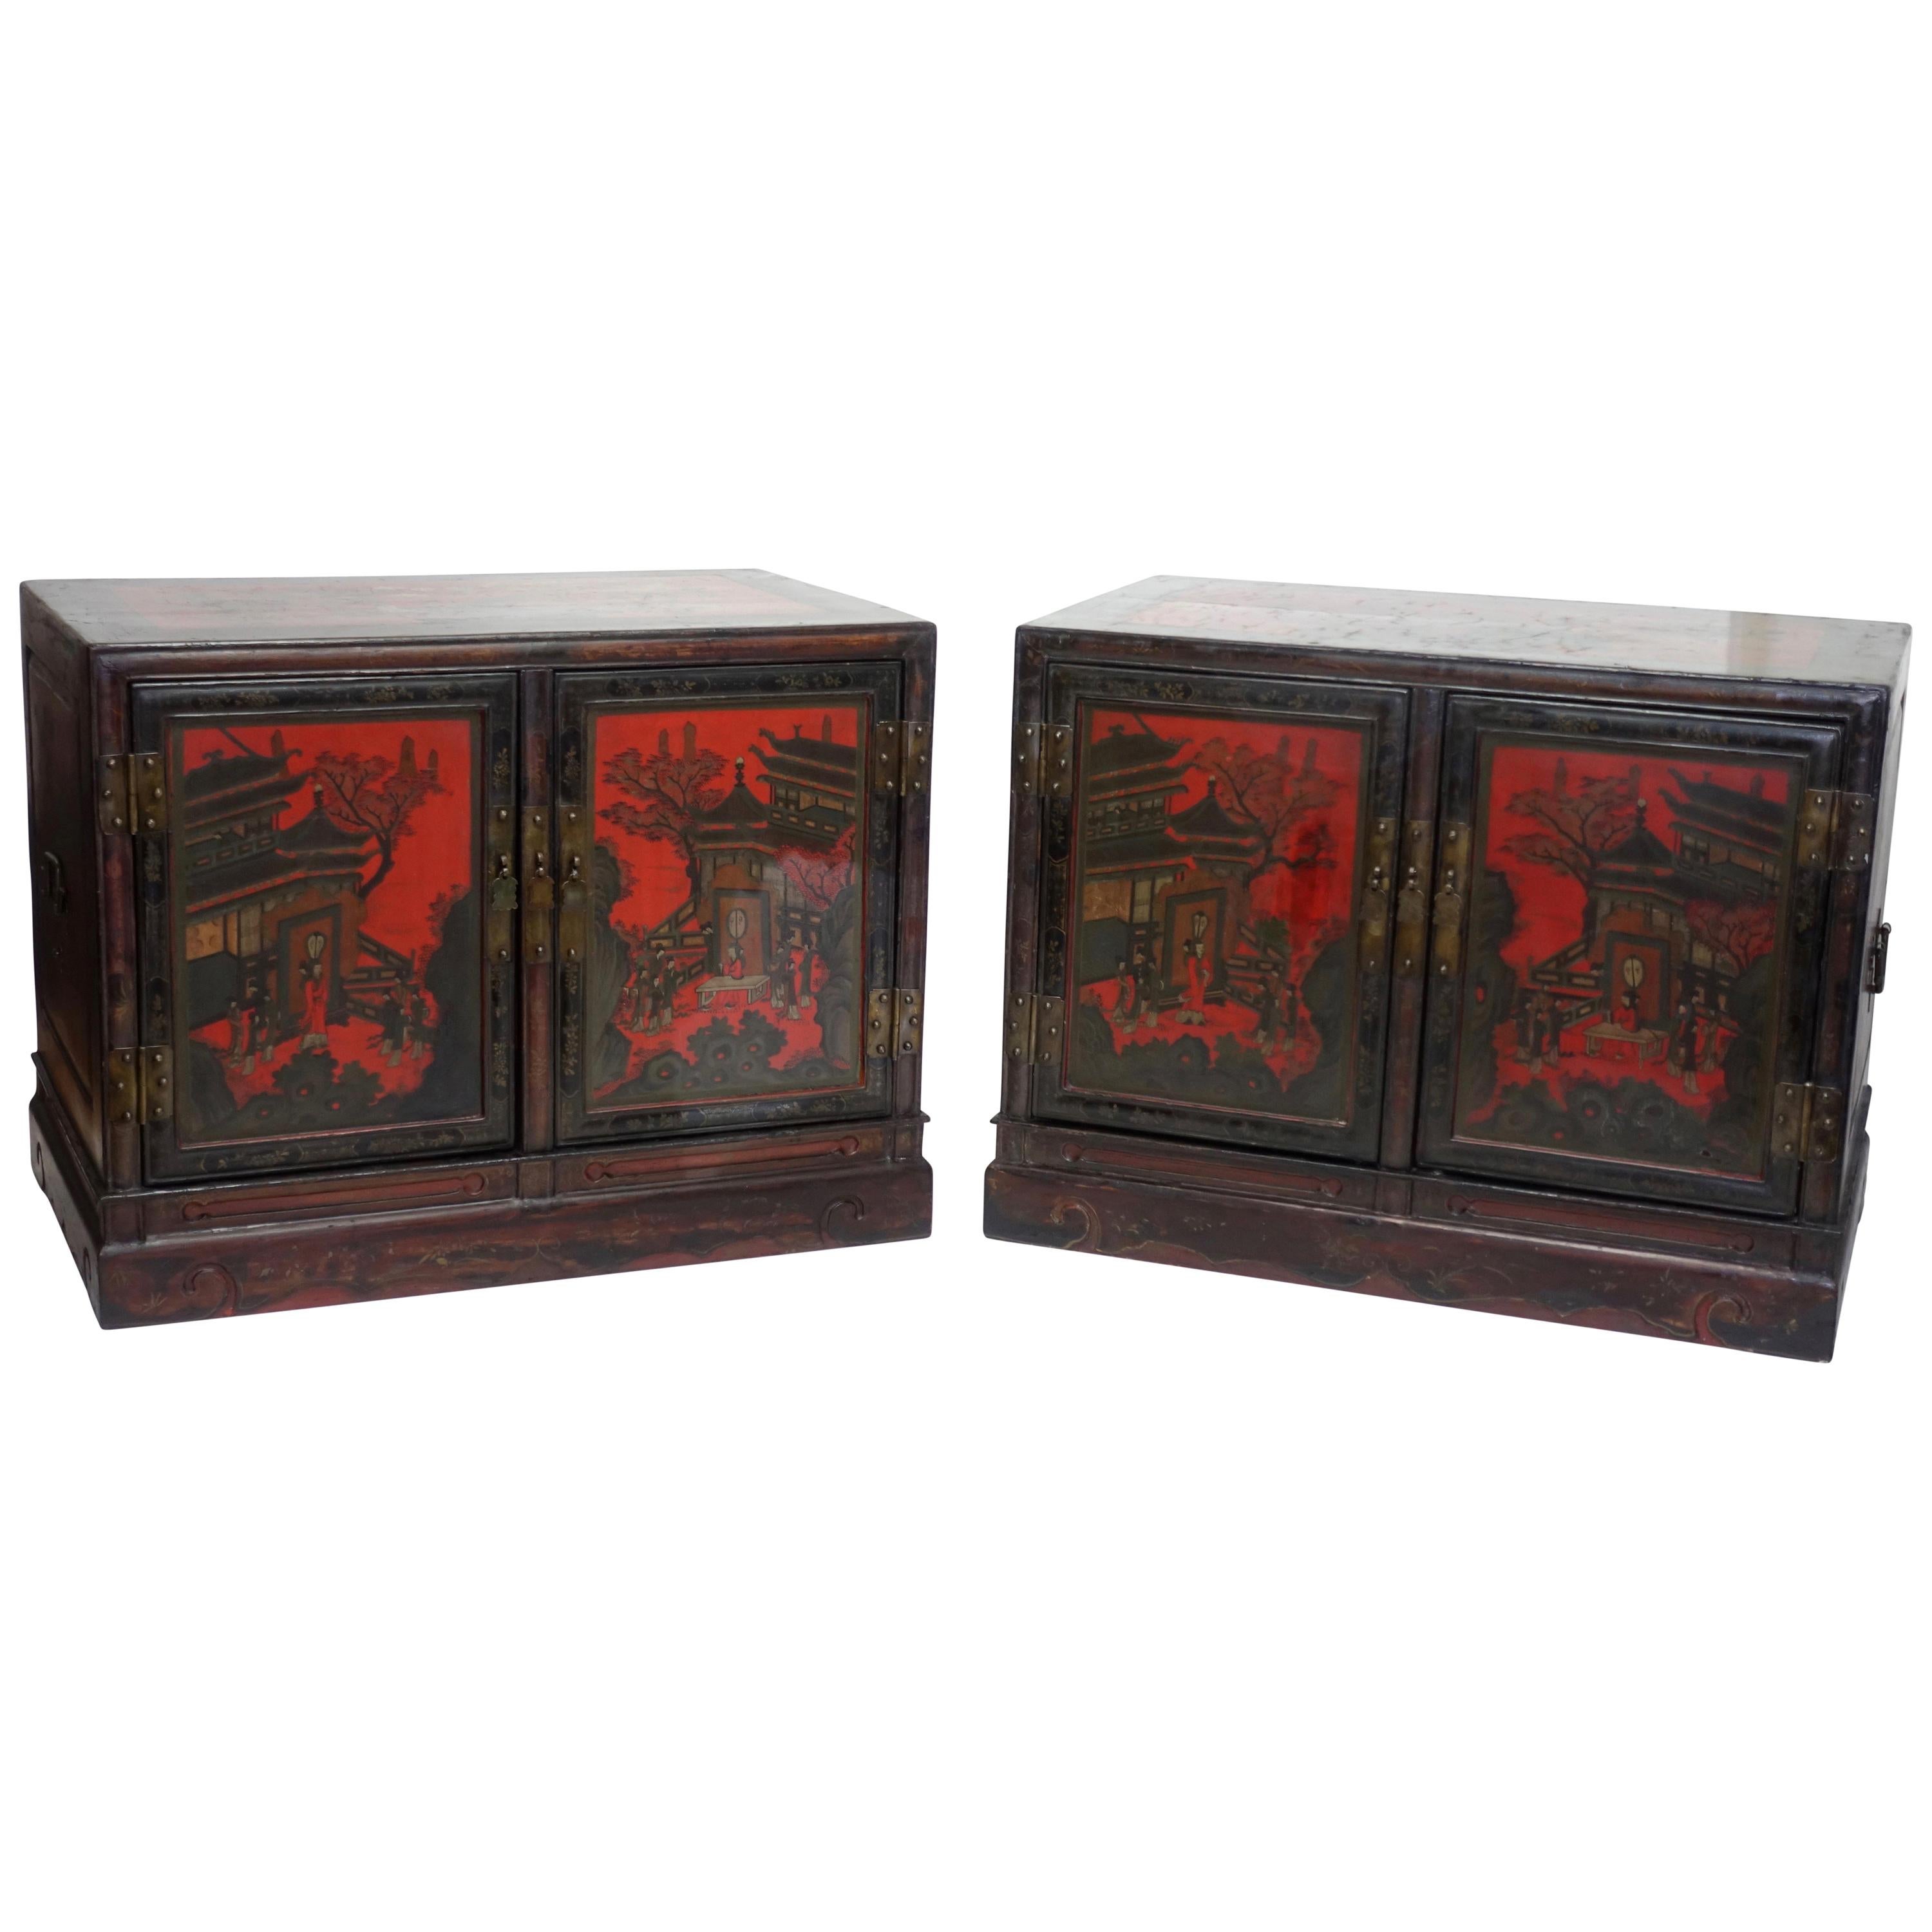 Pair of Chinese Lacquer Robe Cabinets, Qing Dynasty, circa 1840